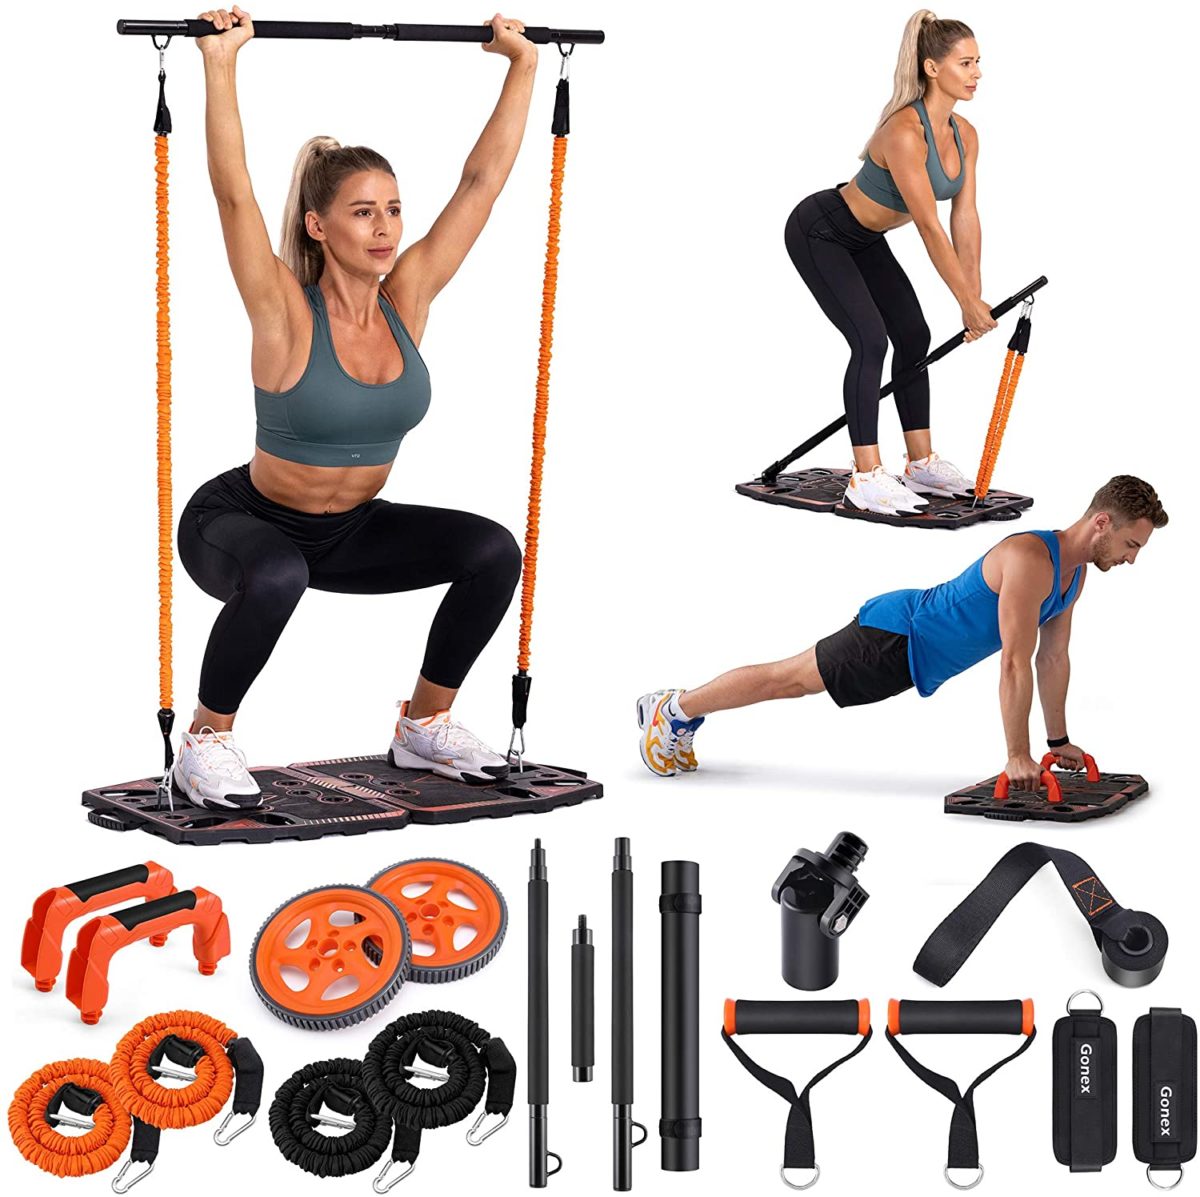 At-Home Workout Equipment You Can Score for Under $250